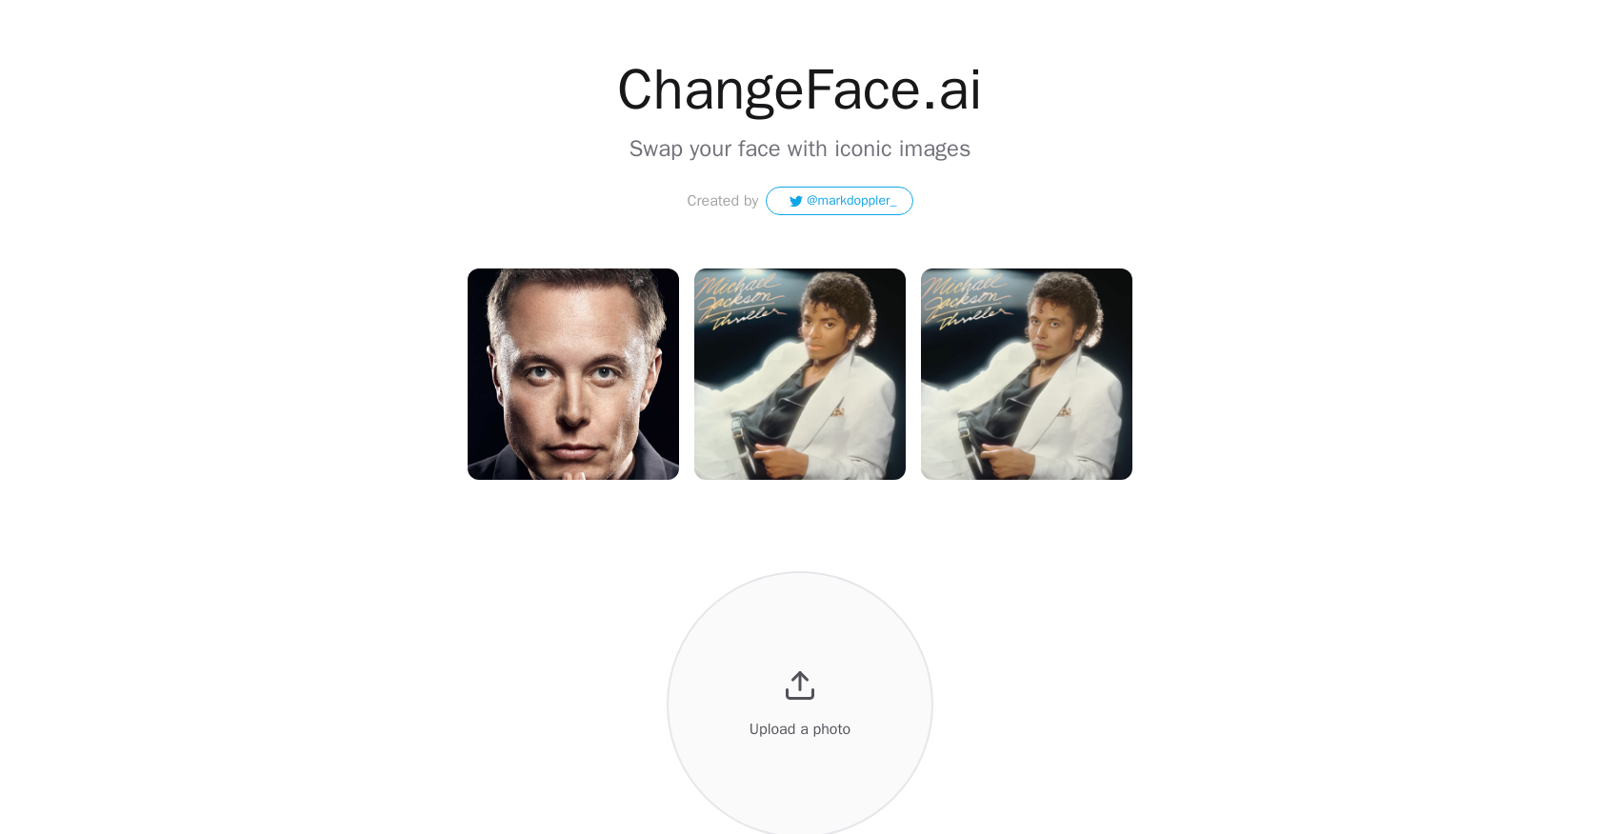 ChangeFace